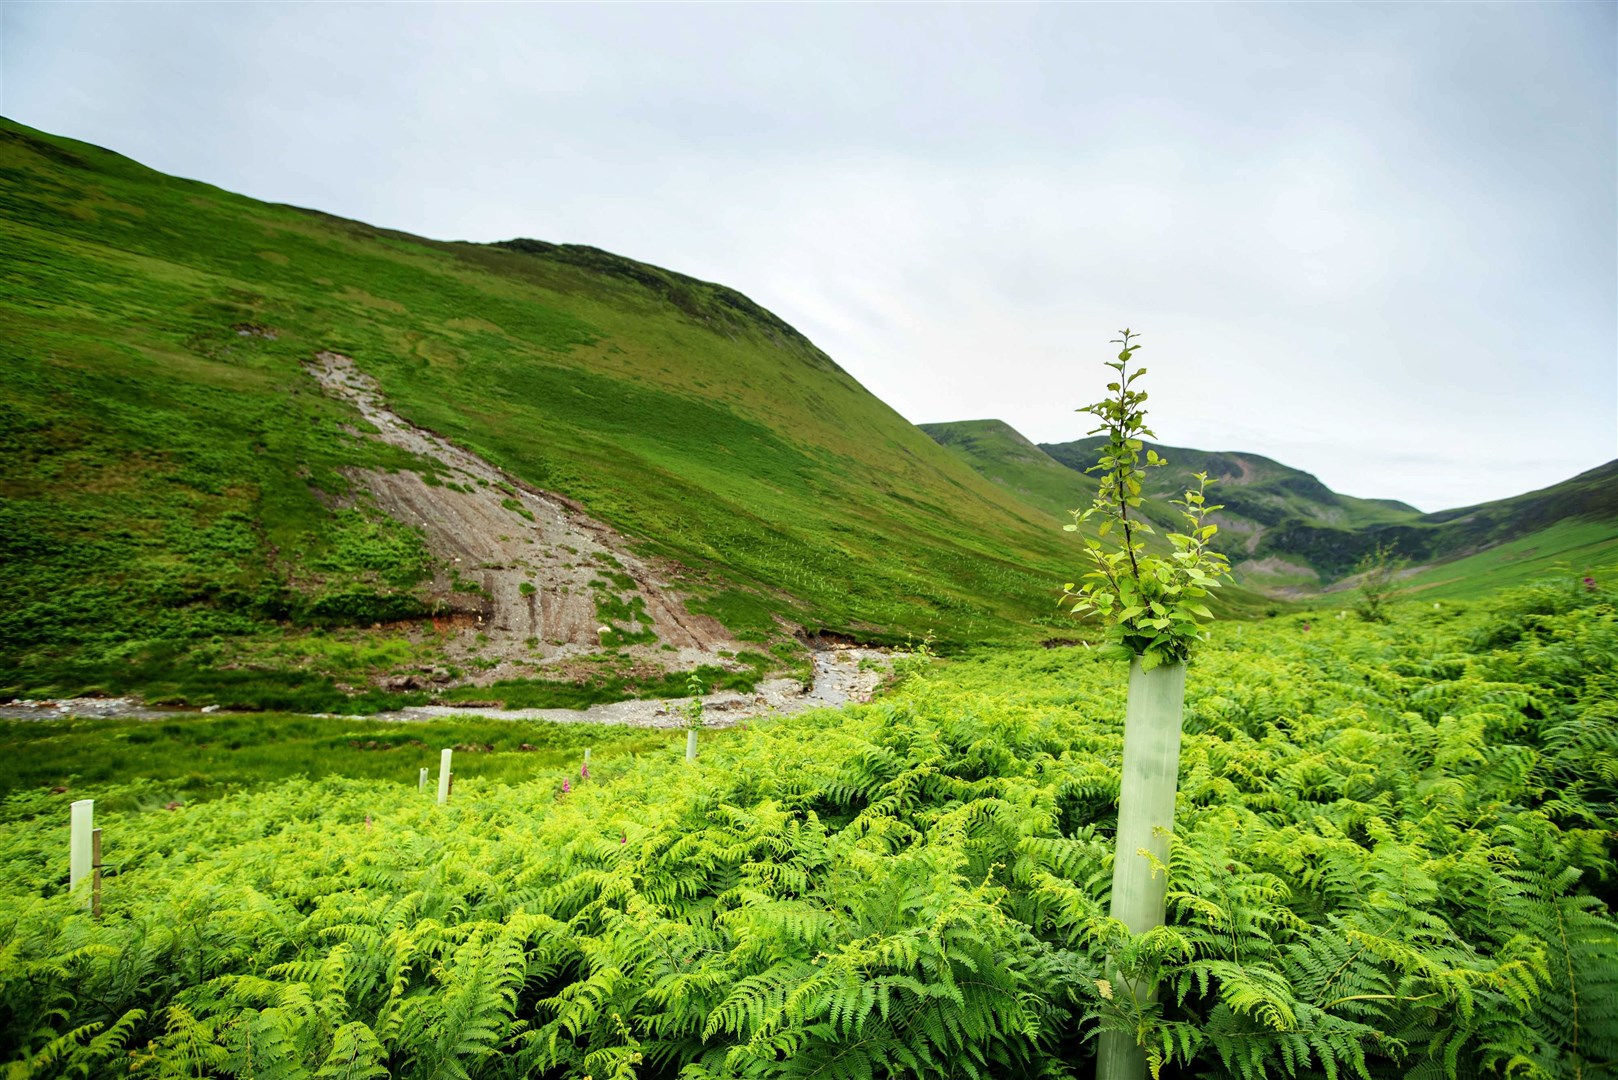 The Tree Action Plan aims to treble tree planting by 2024 (John Malley/National Trust)